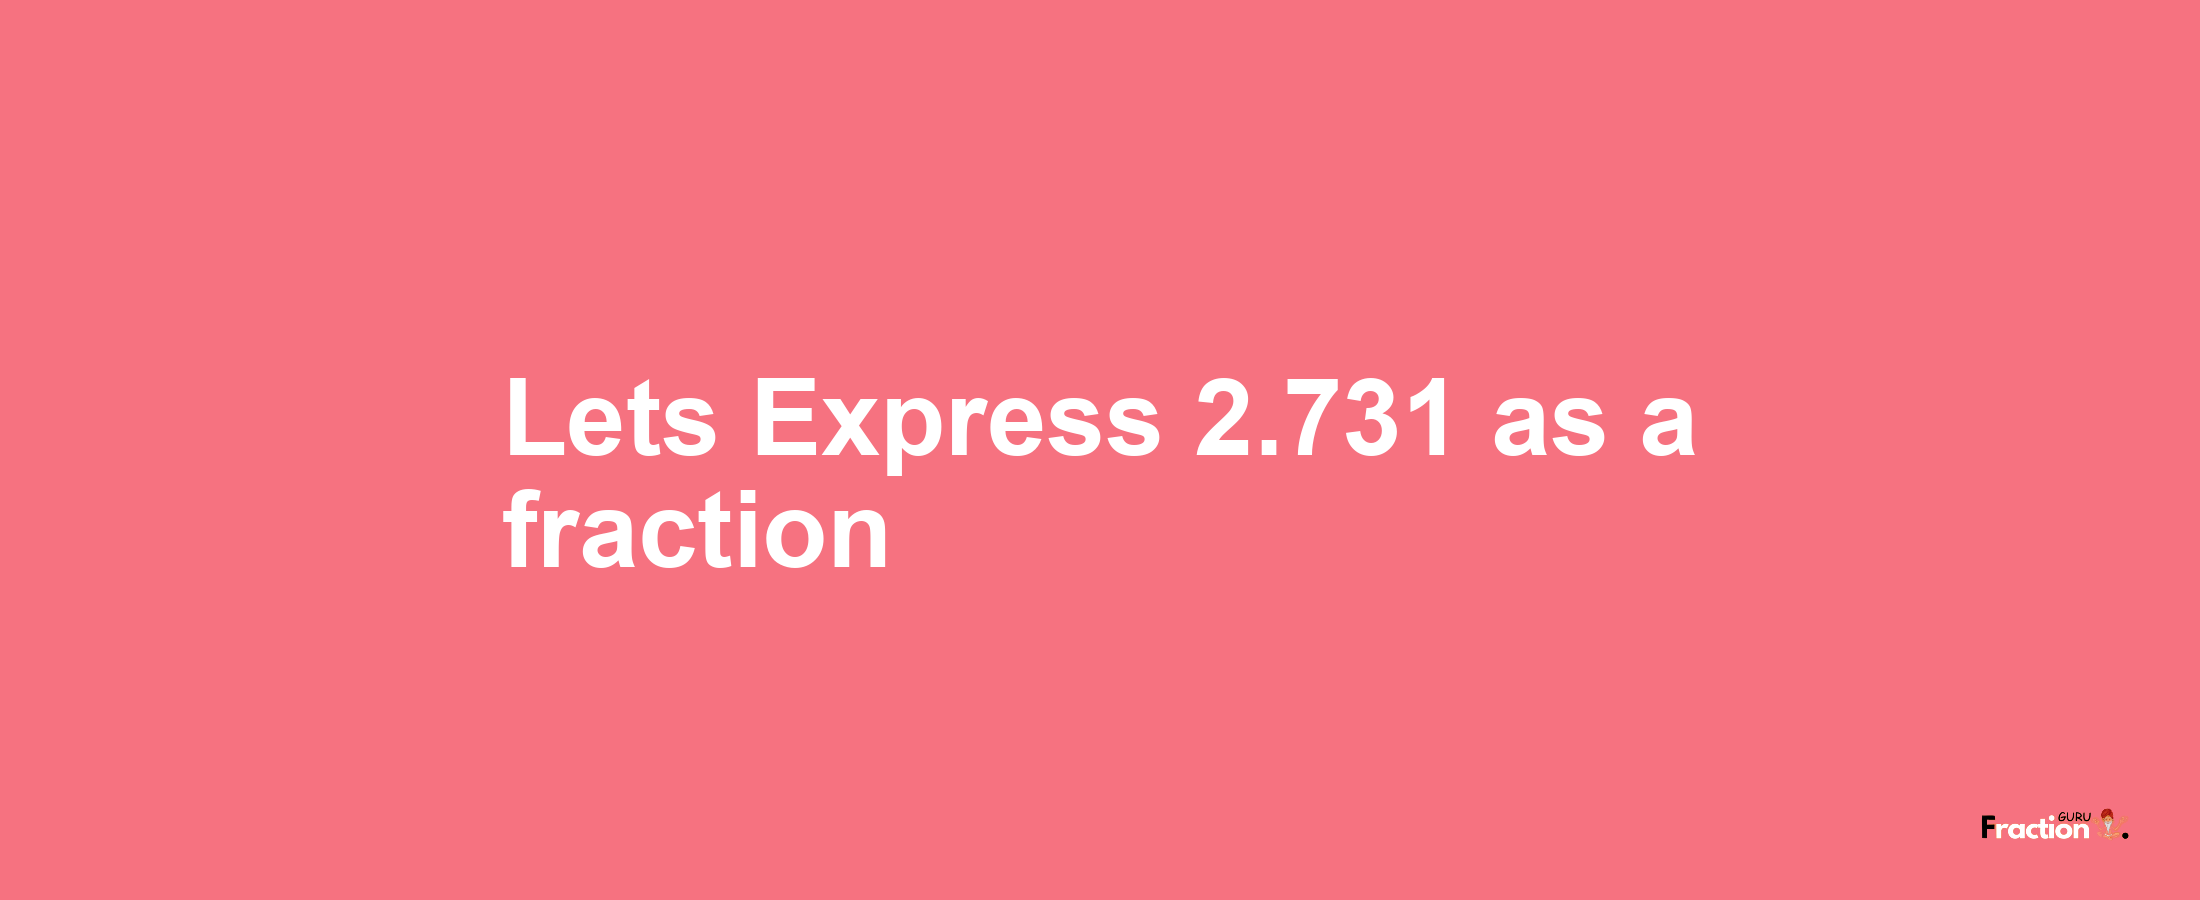 Lets Express 2.731 as afraction